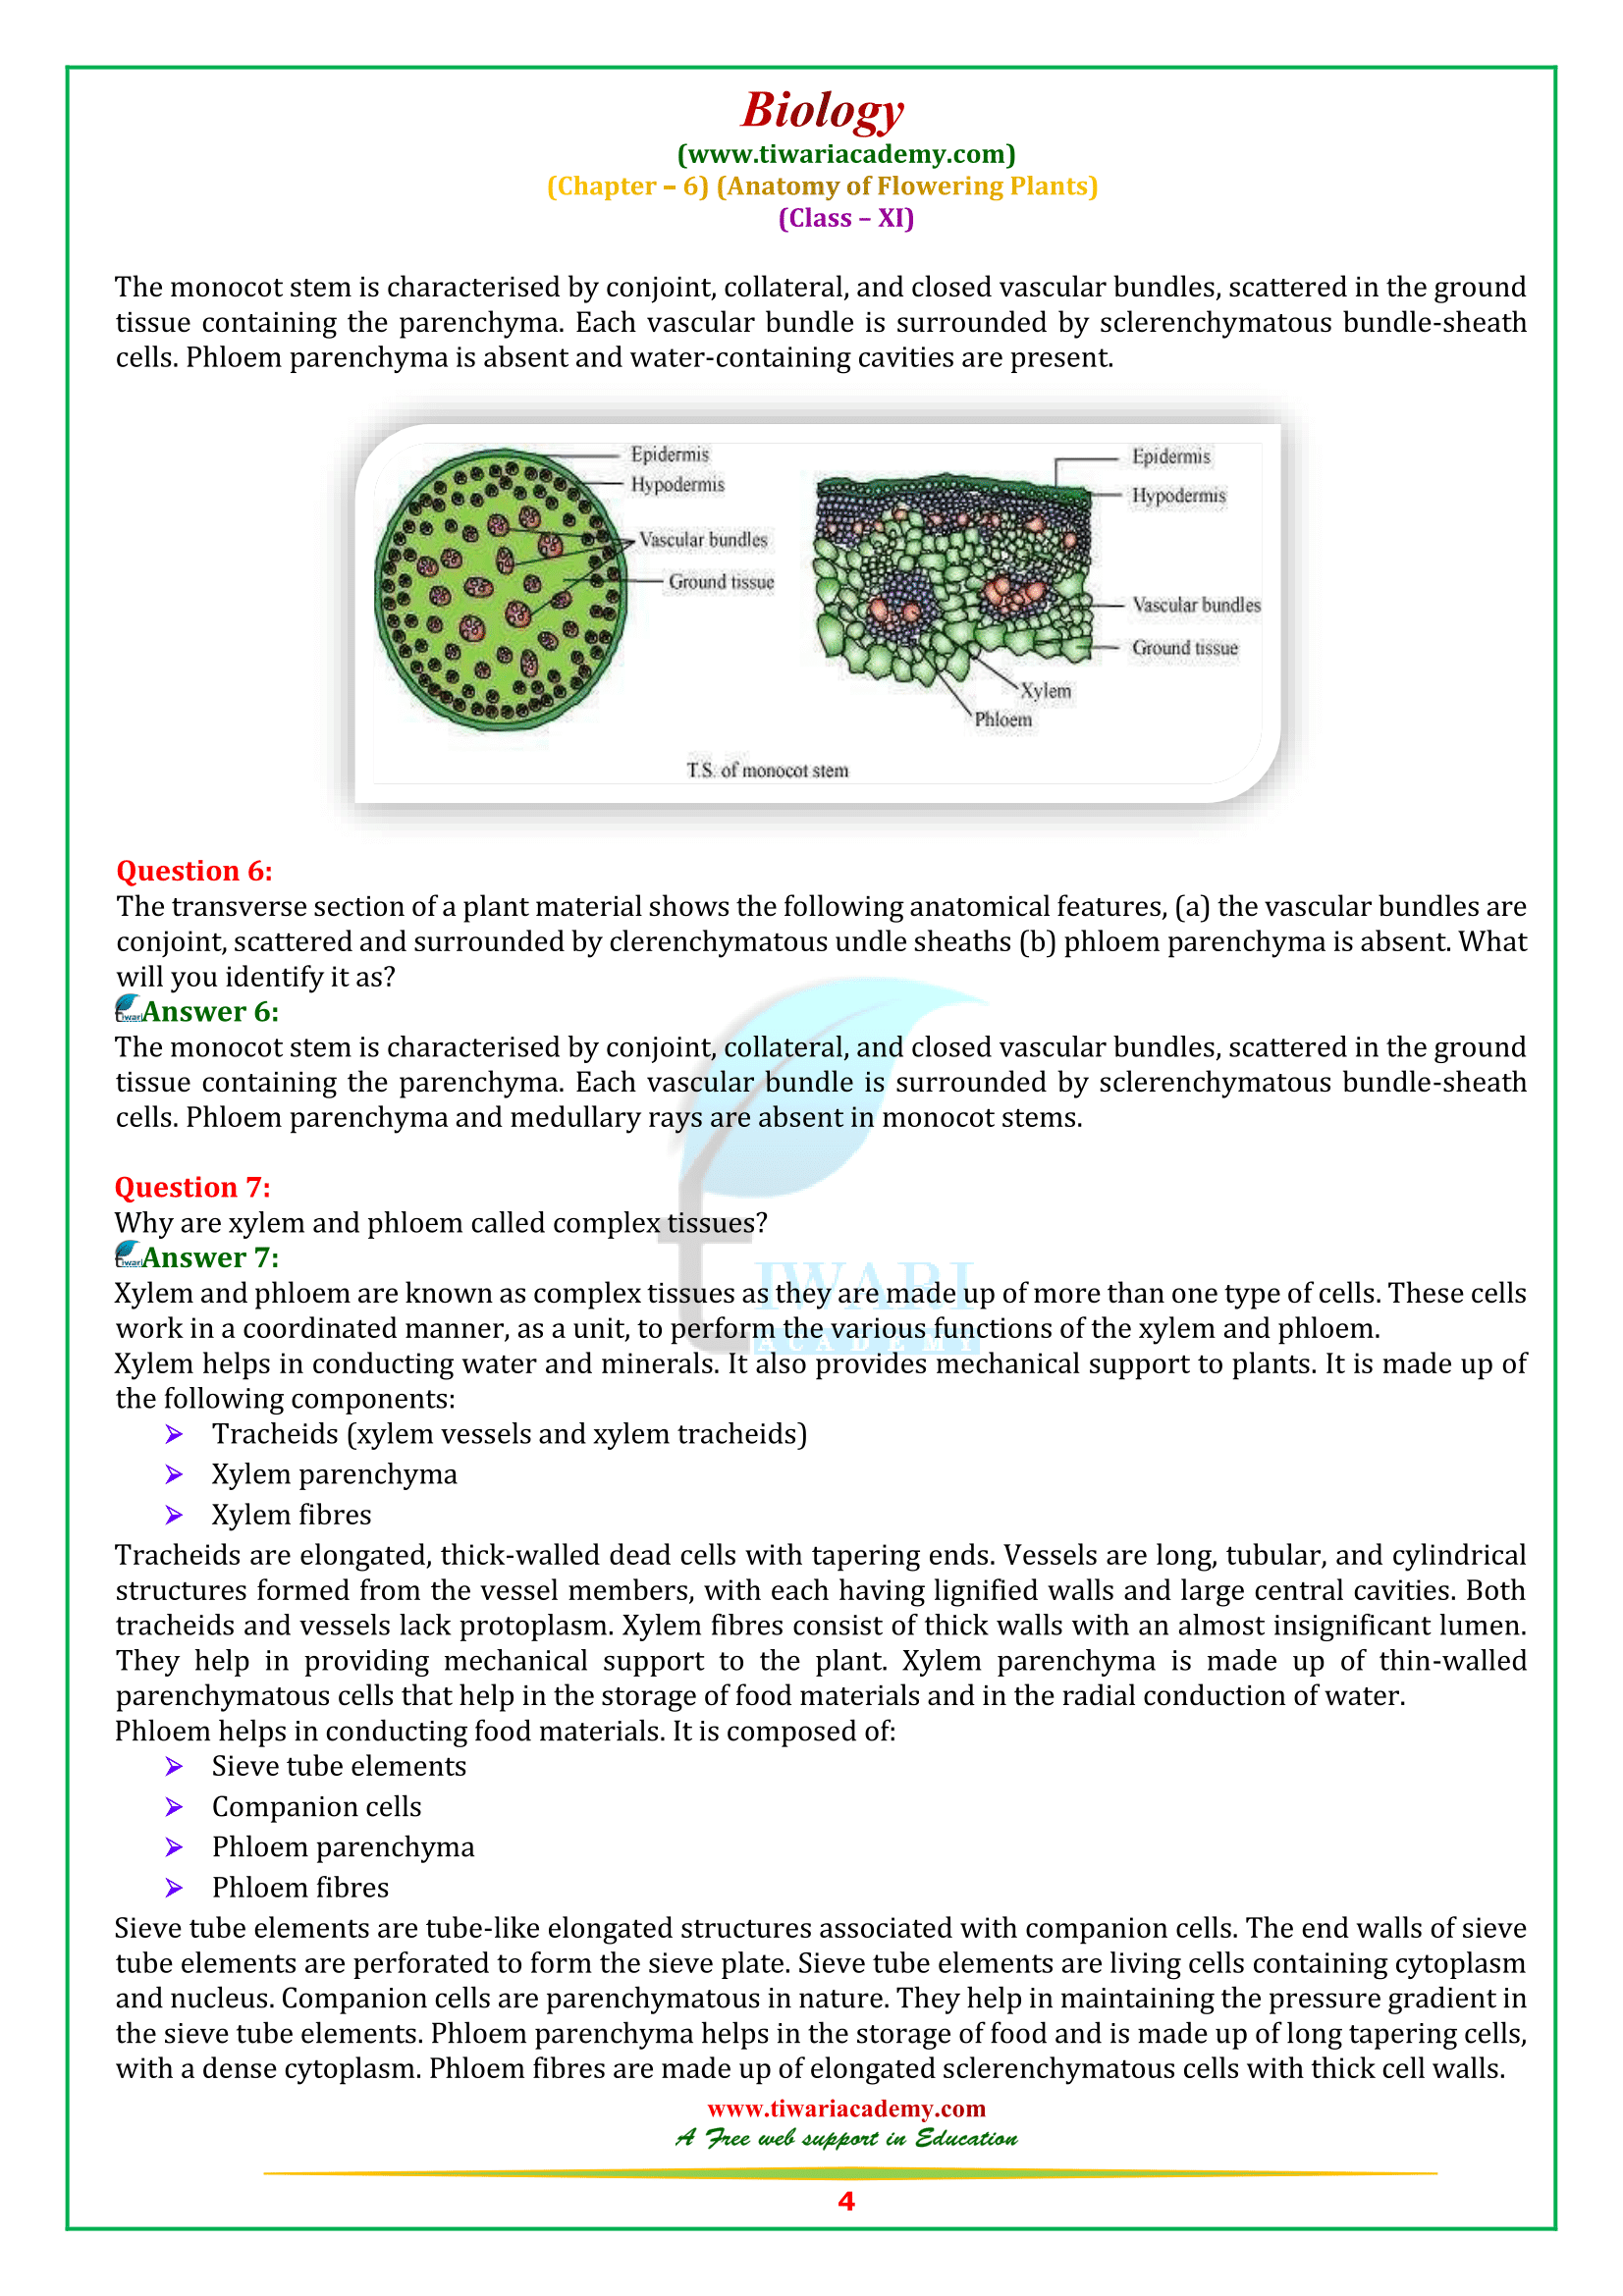 NCERT Solutions for Class 11 Biology Chapter 6 in English Medium